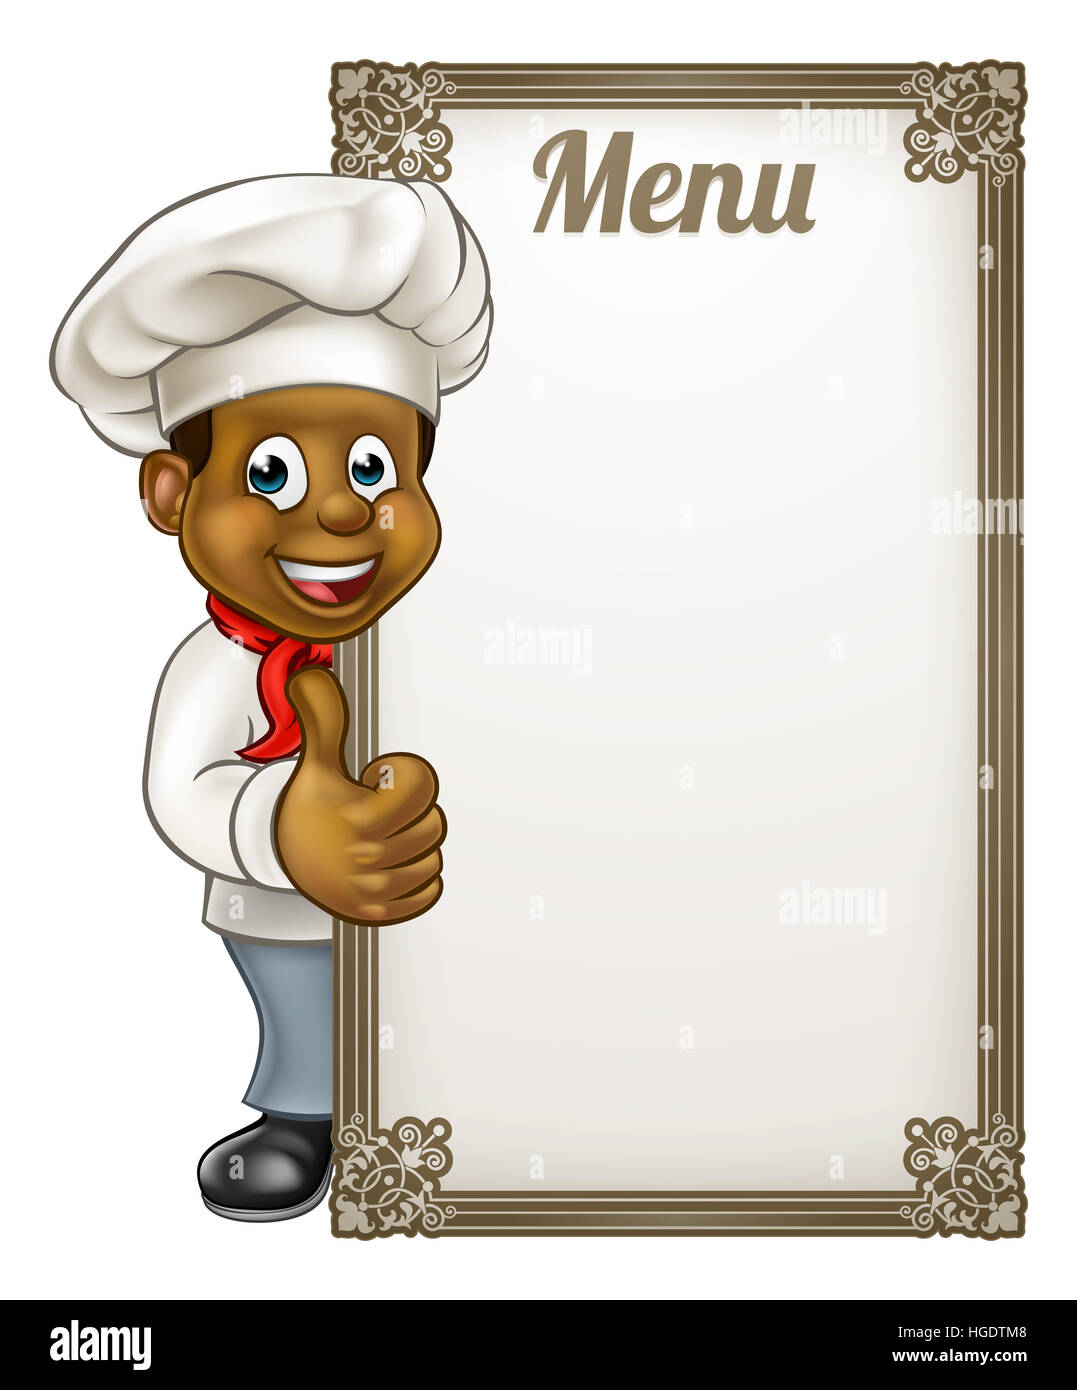 Cartoon black chef or baker character giving thumbs up with menu sign board Stock Photo